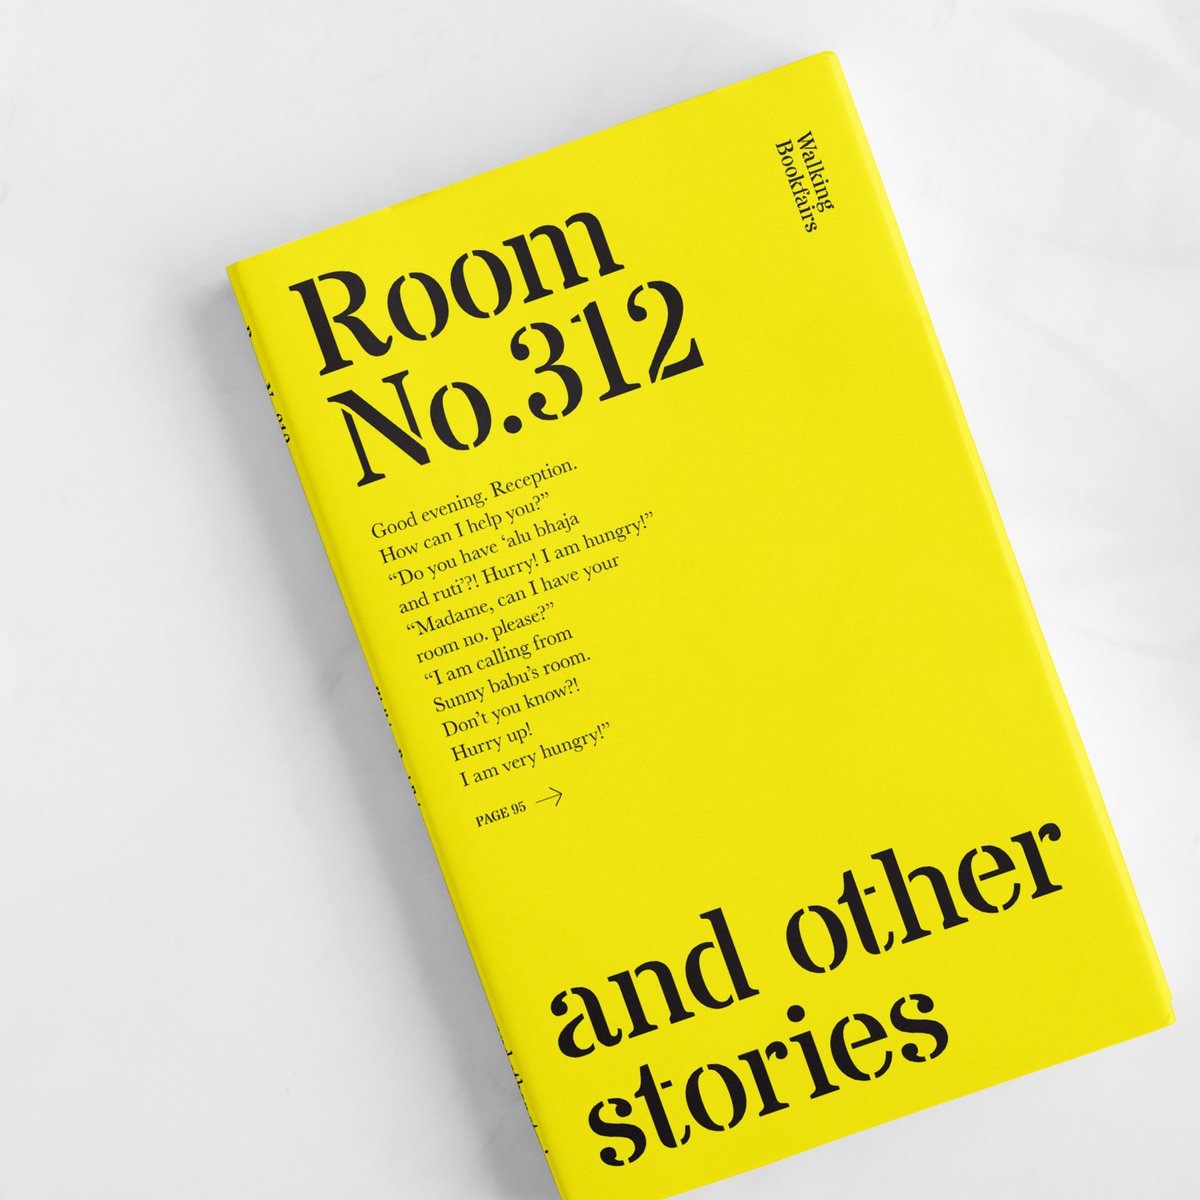 Room No. 312 and other stories